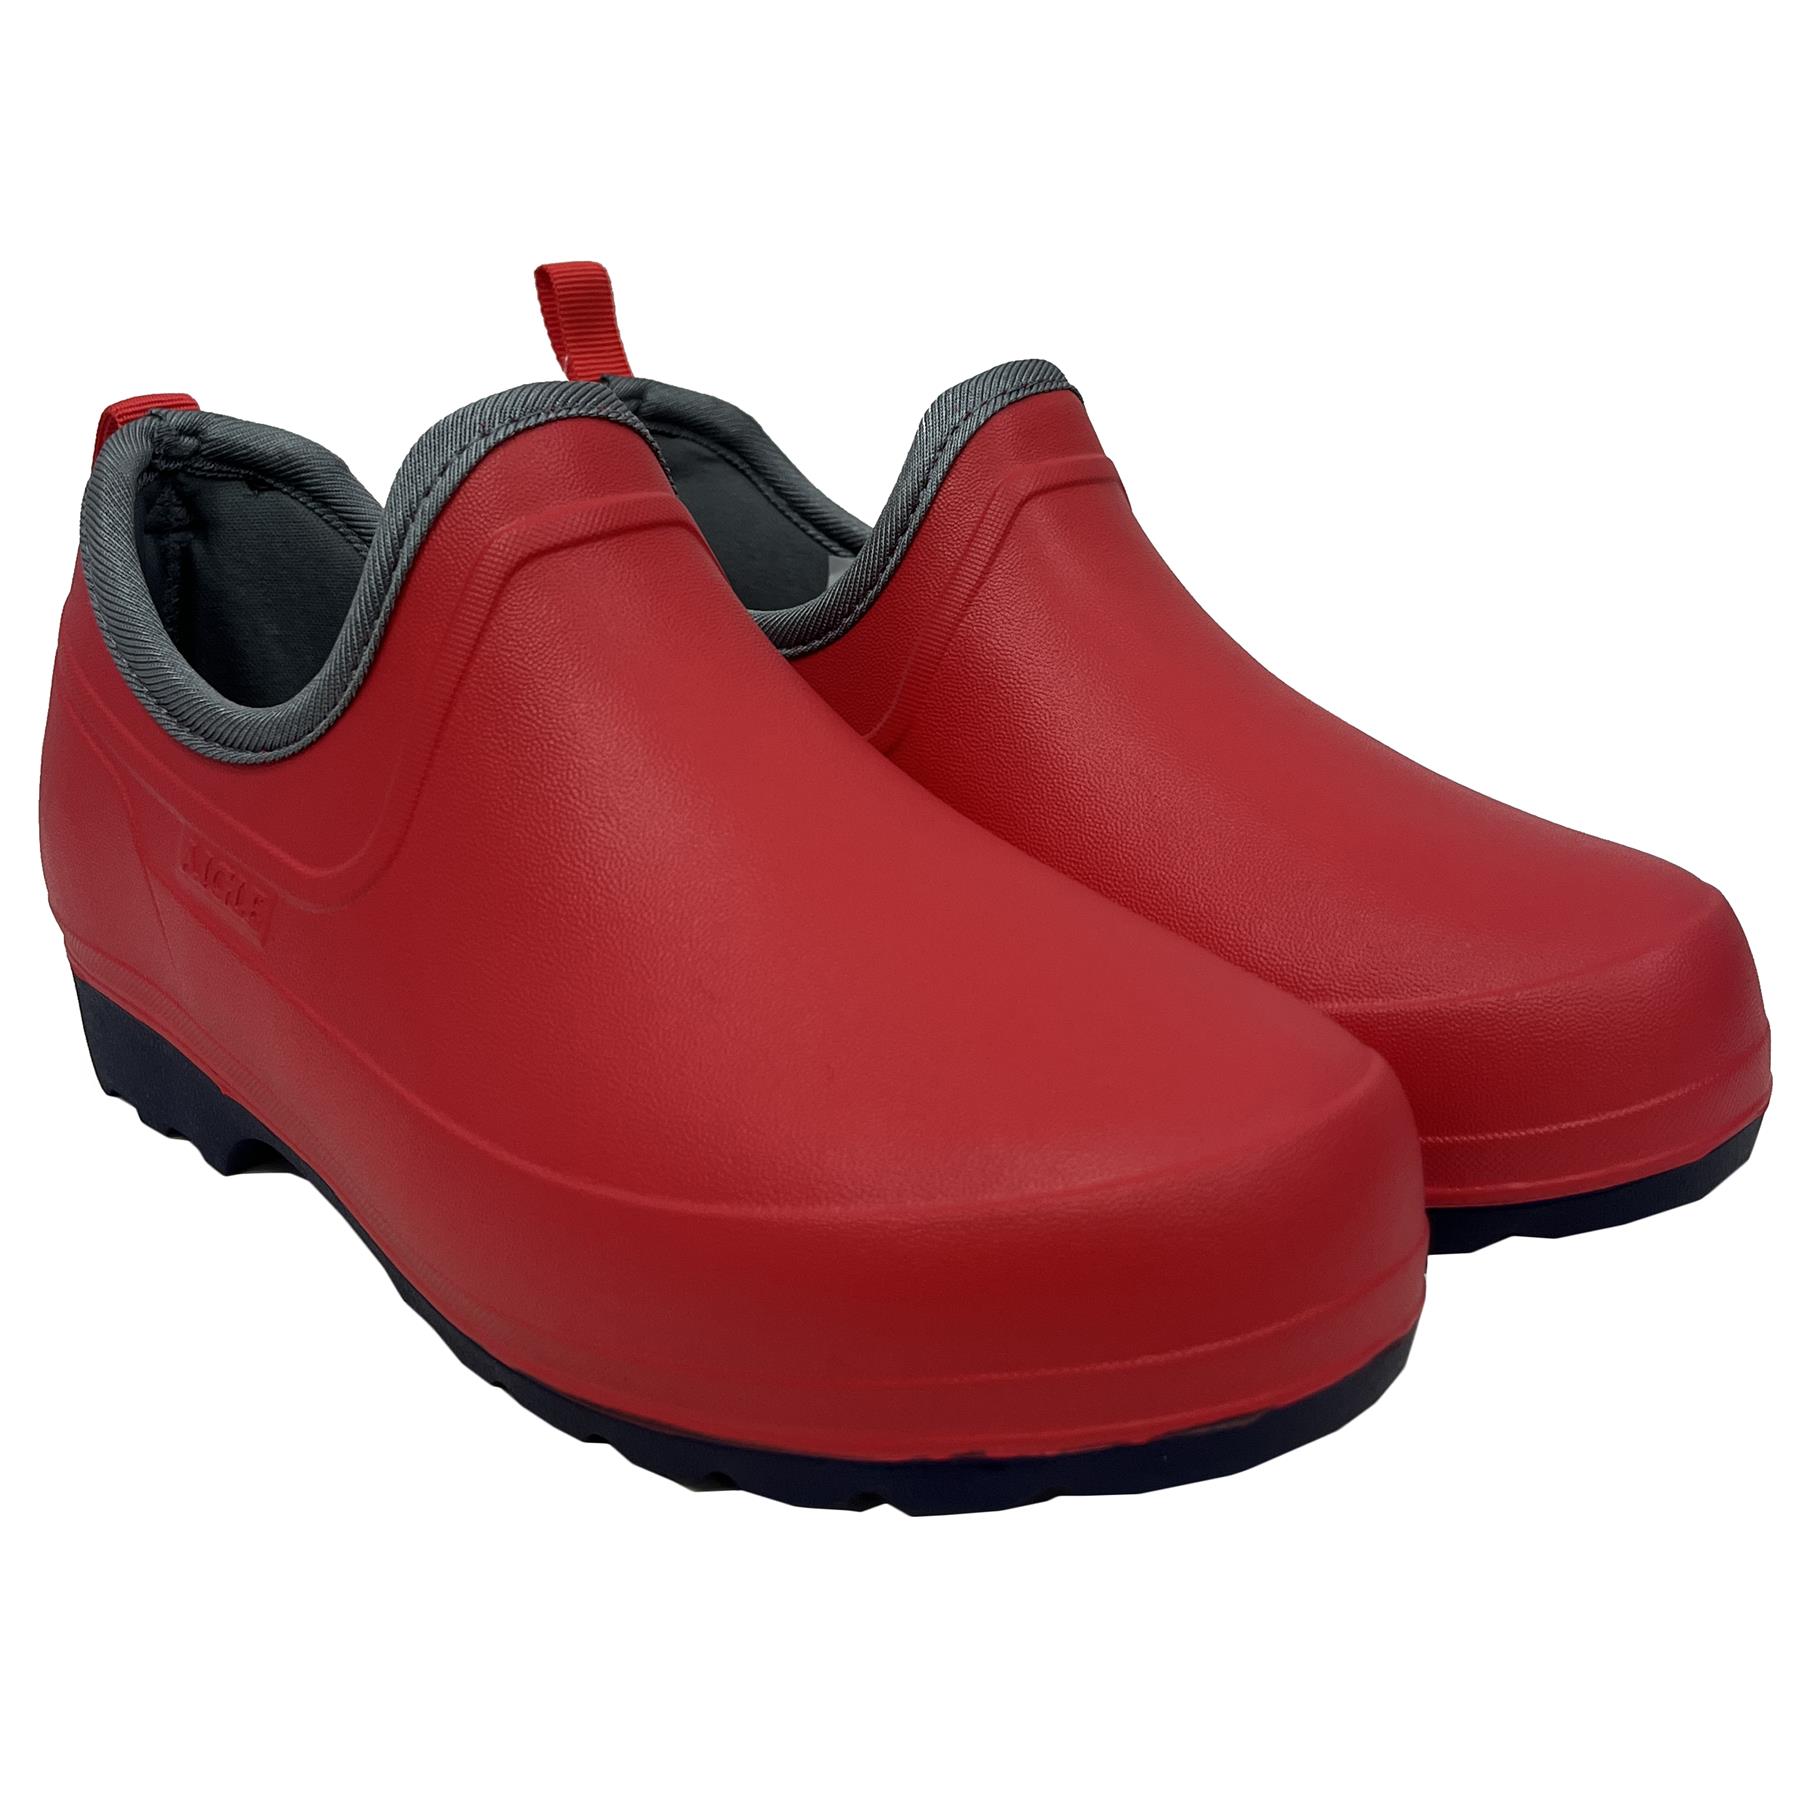 Aigle Womens Taden Plus Clogs Questions & Answers